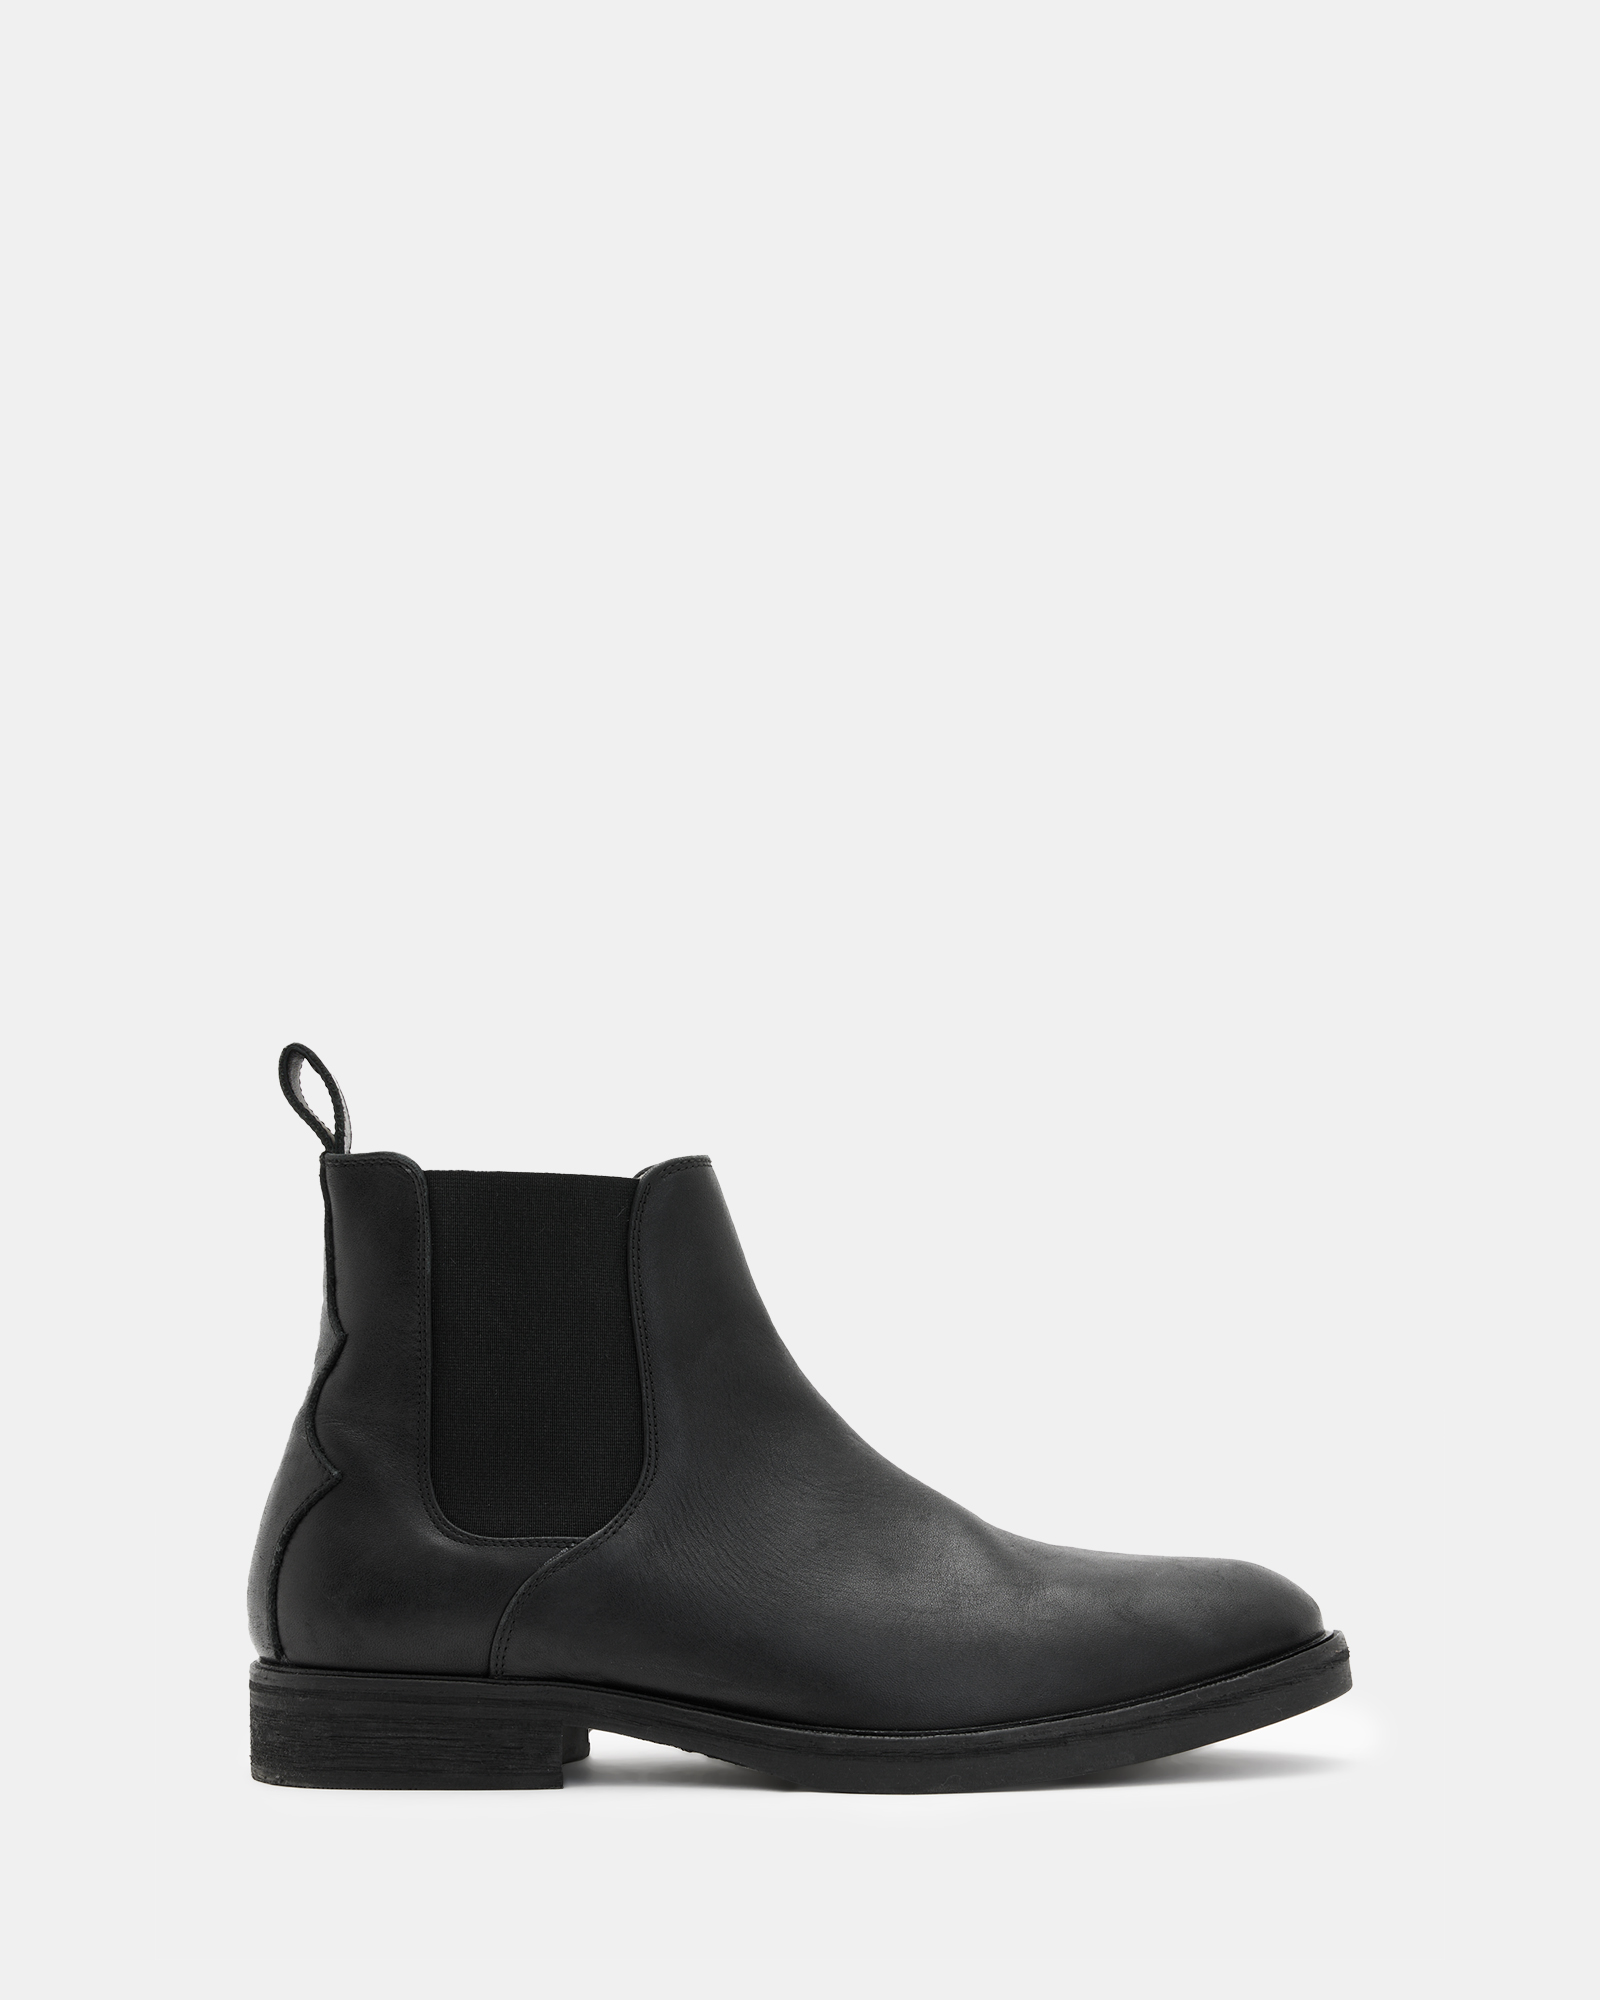 AllSaints Creed Leather Chelsea Boots,, Black, Size: UK